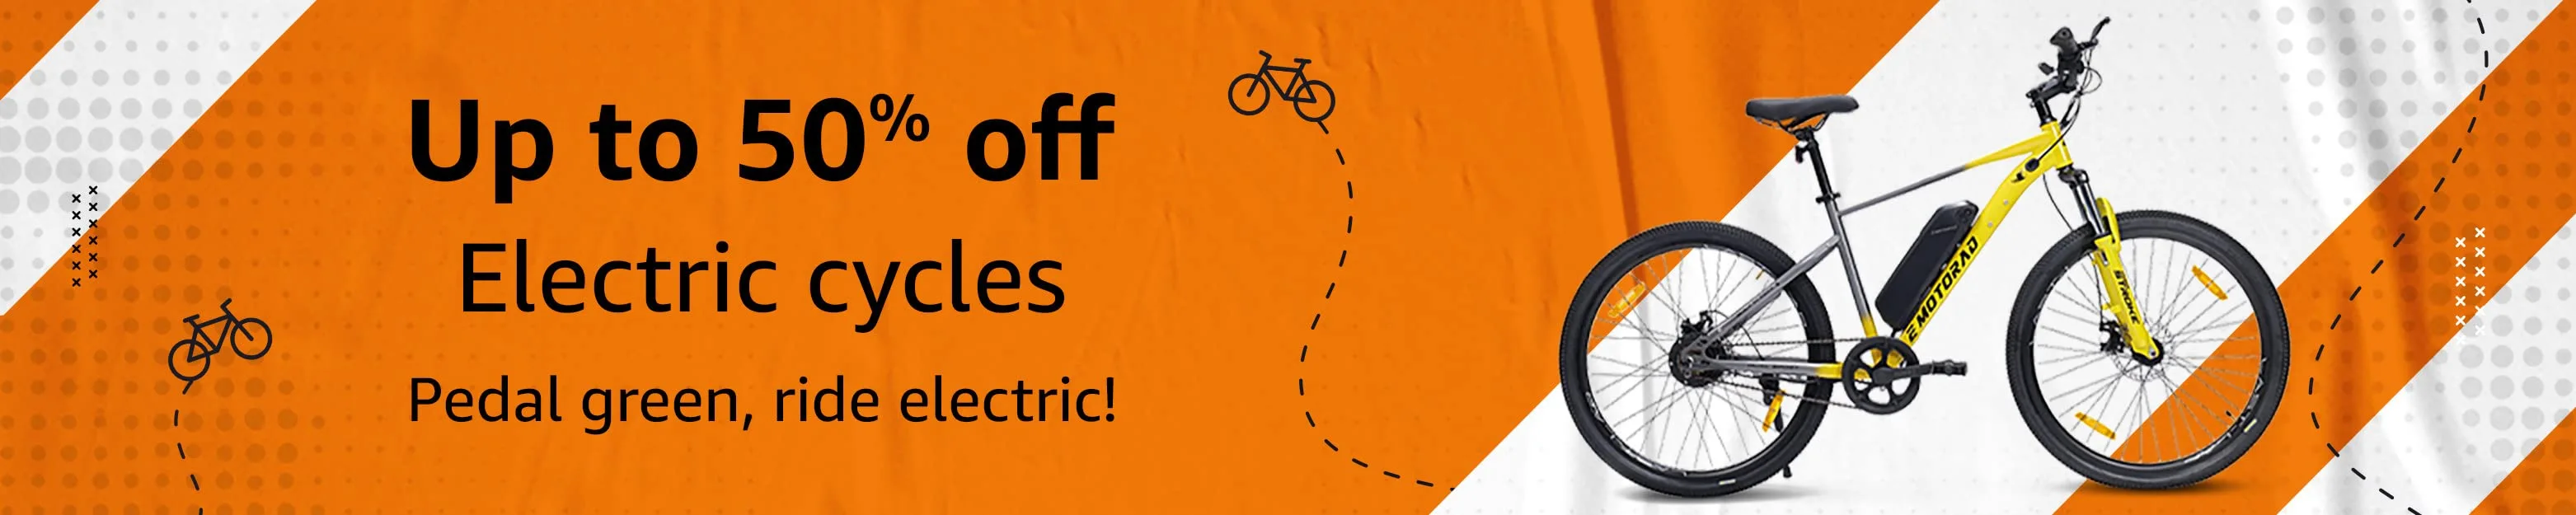 Electric Cycles - Upto 50% Off